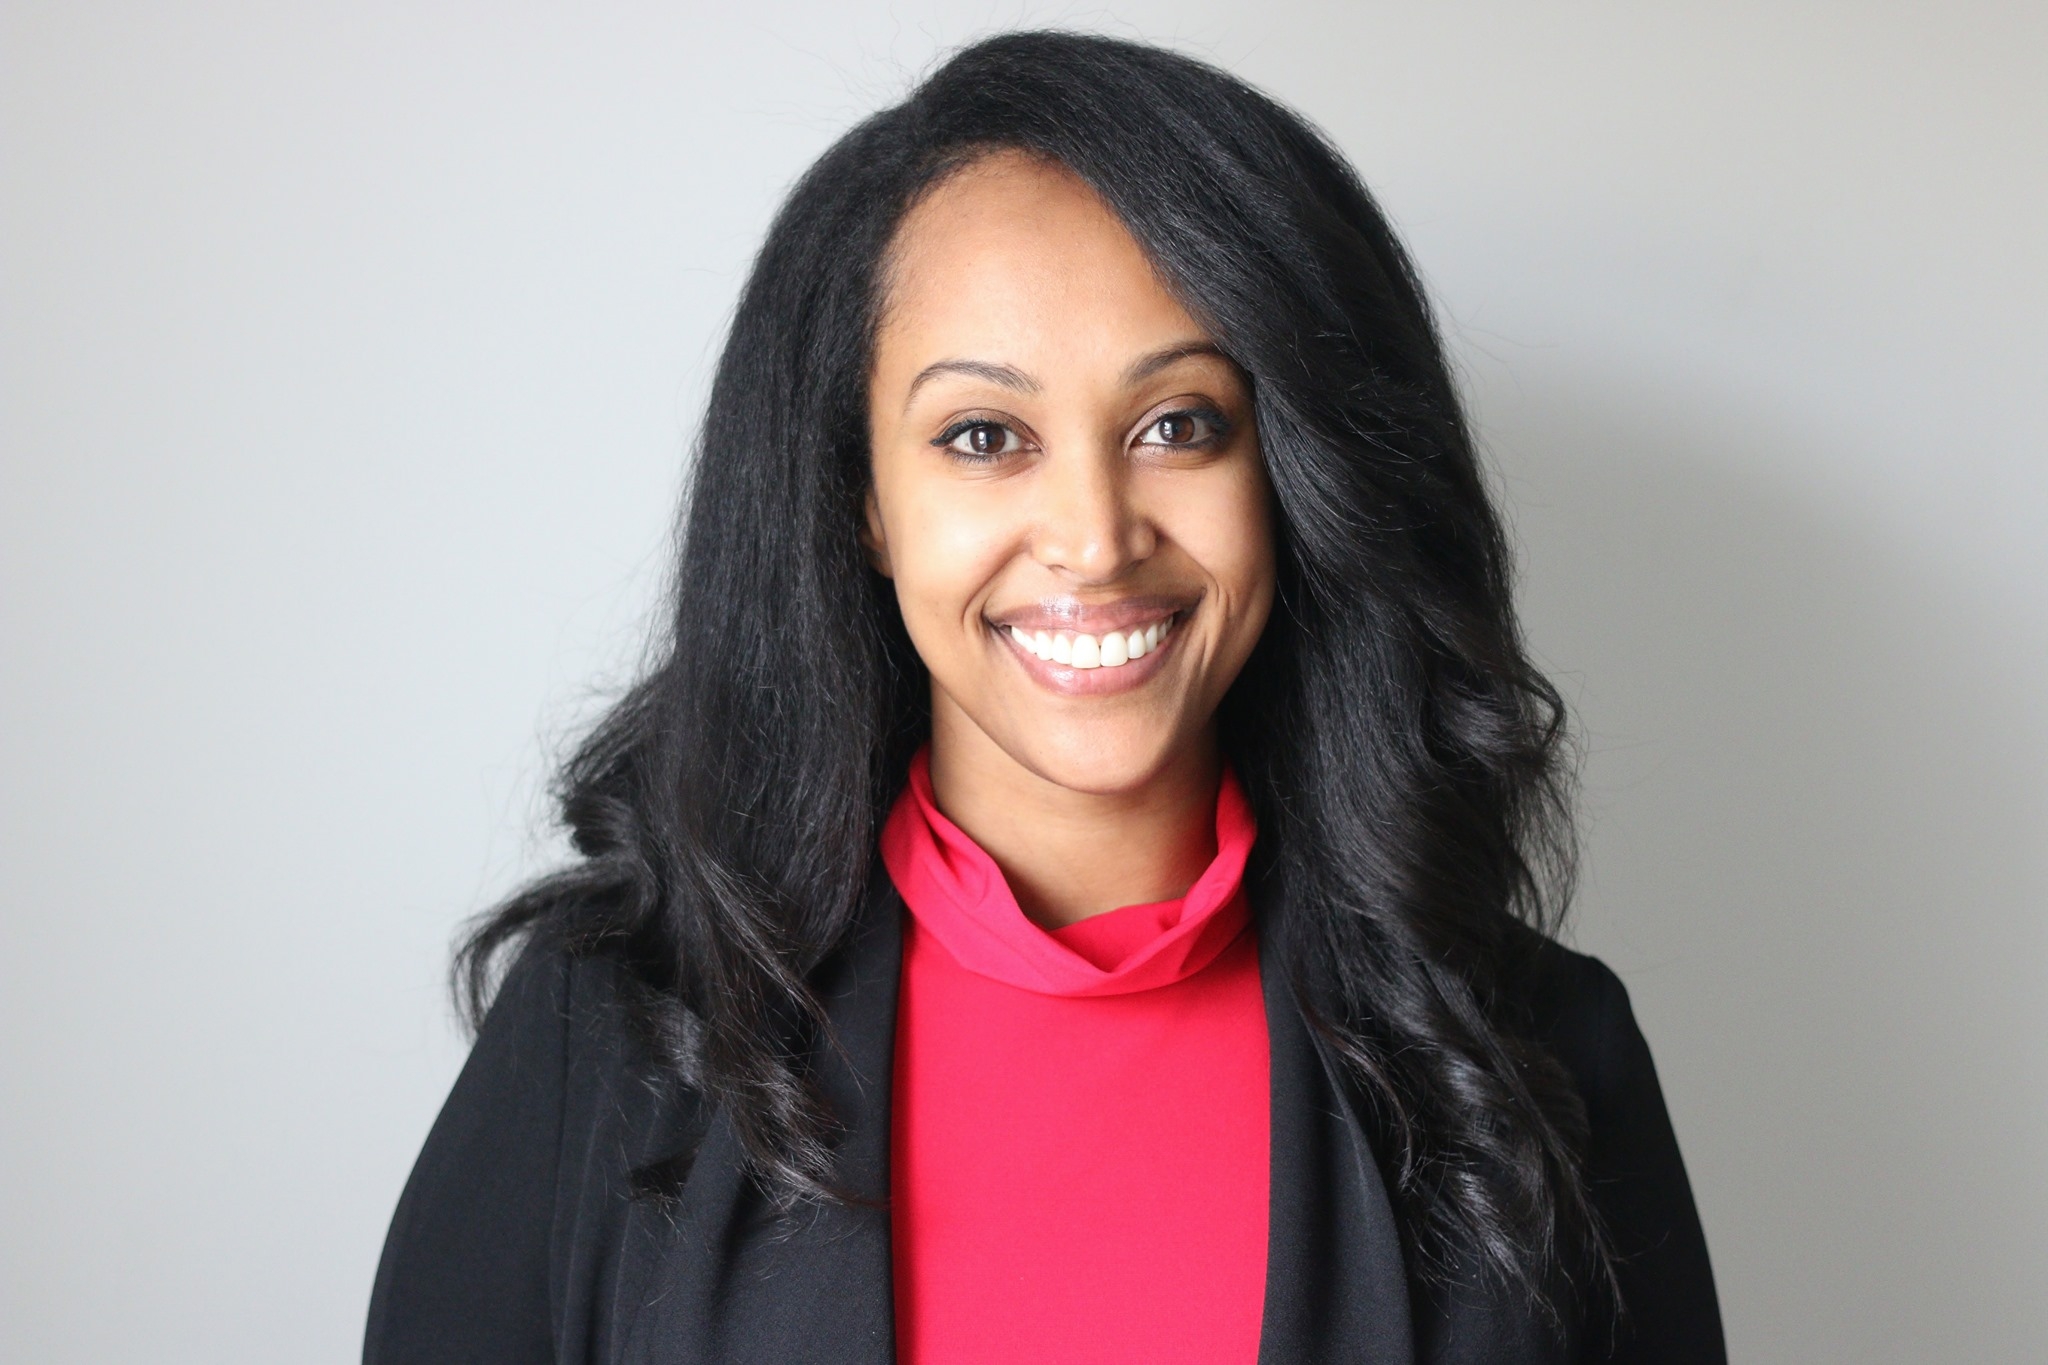 Interview with Manal Abullahi, Ethiopian Canadian Running for Ontario Parliament